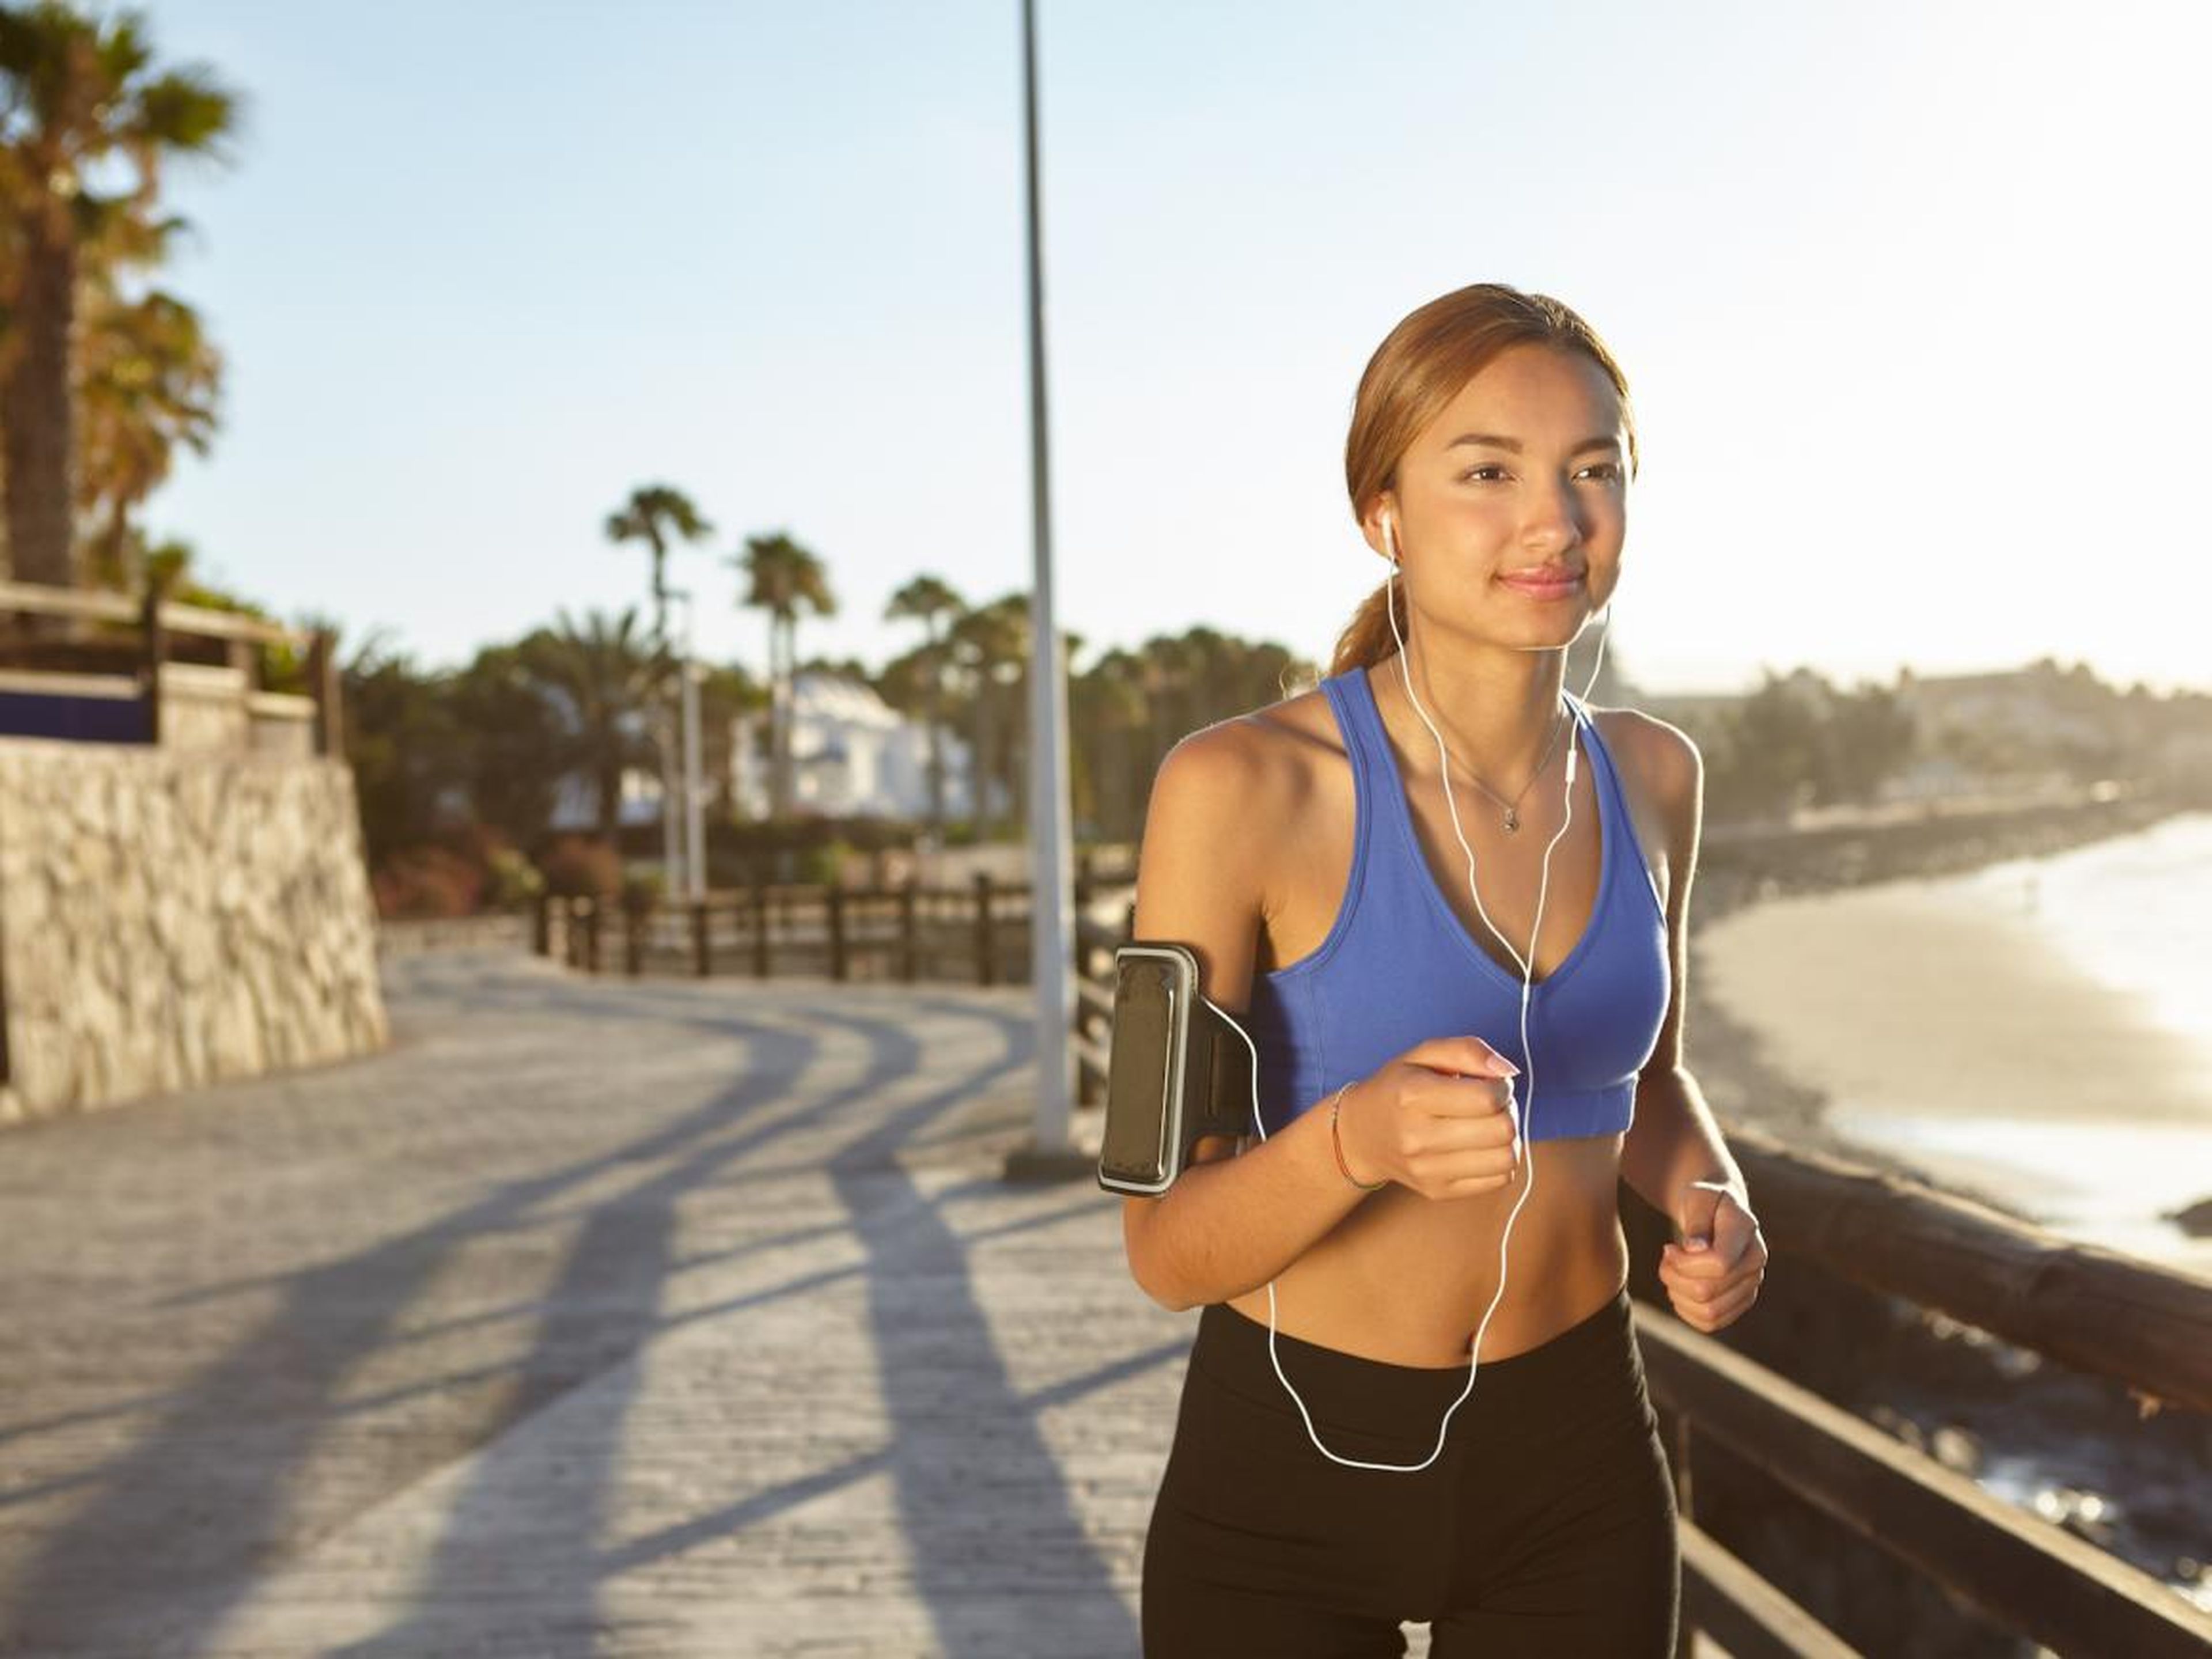 How to start running, according to an Olympian who now coaches runners